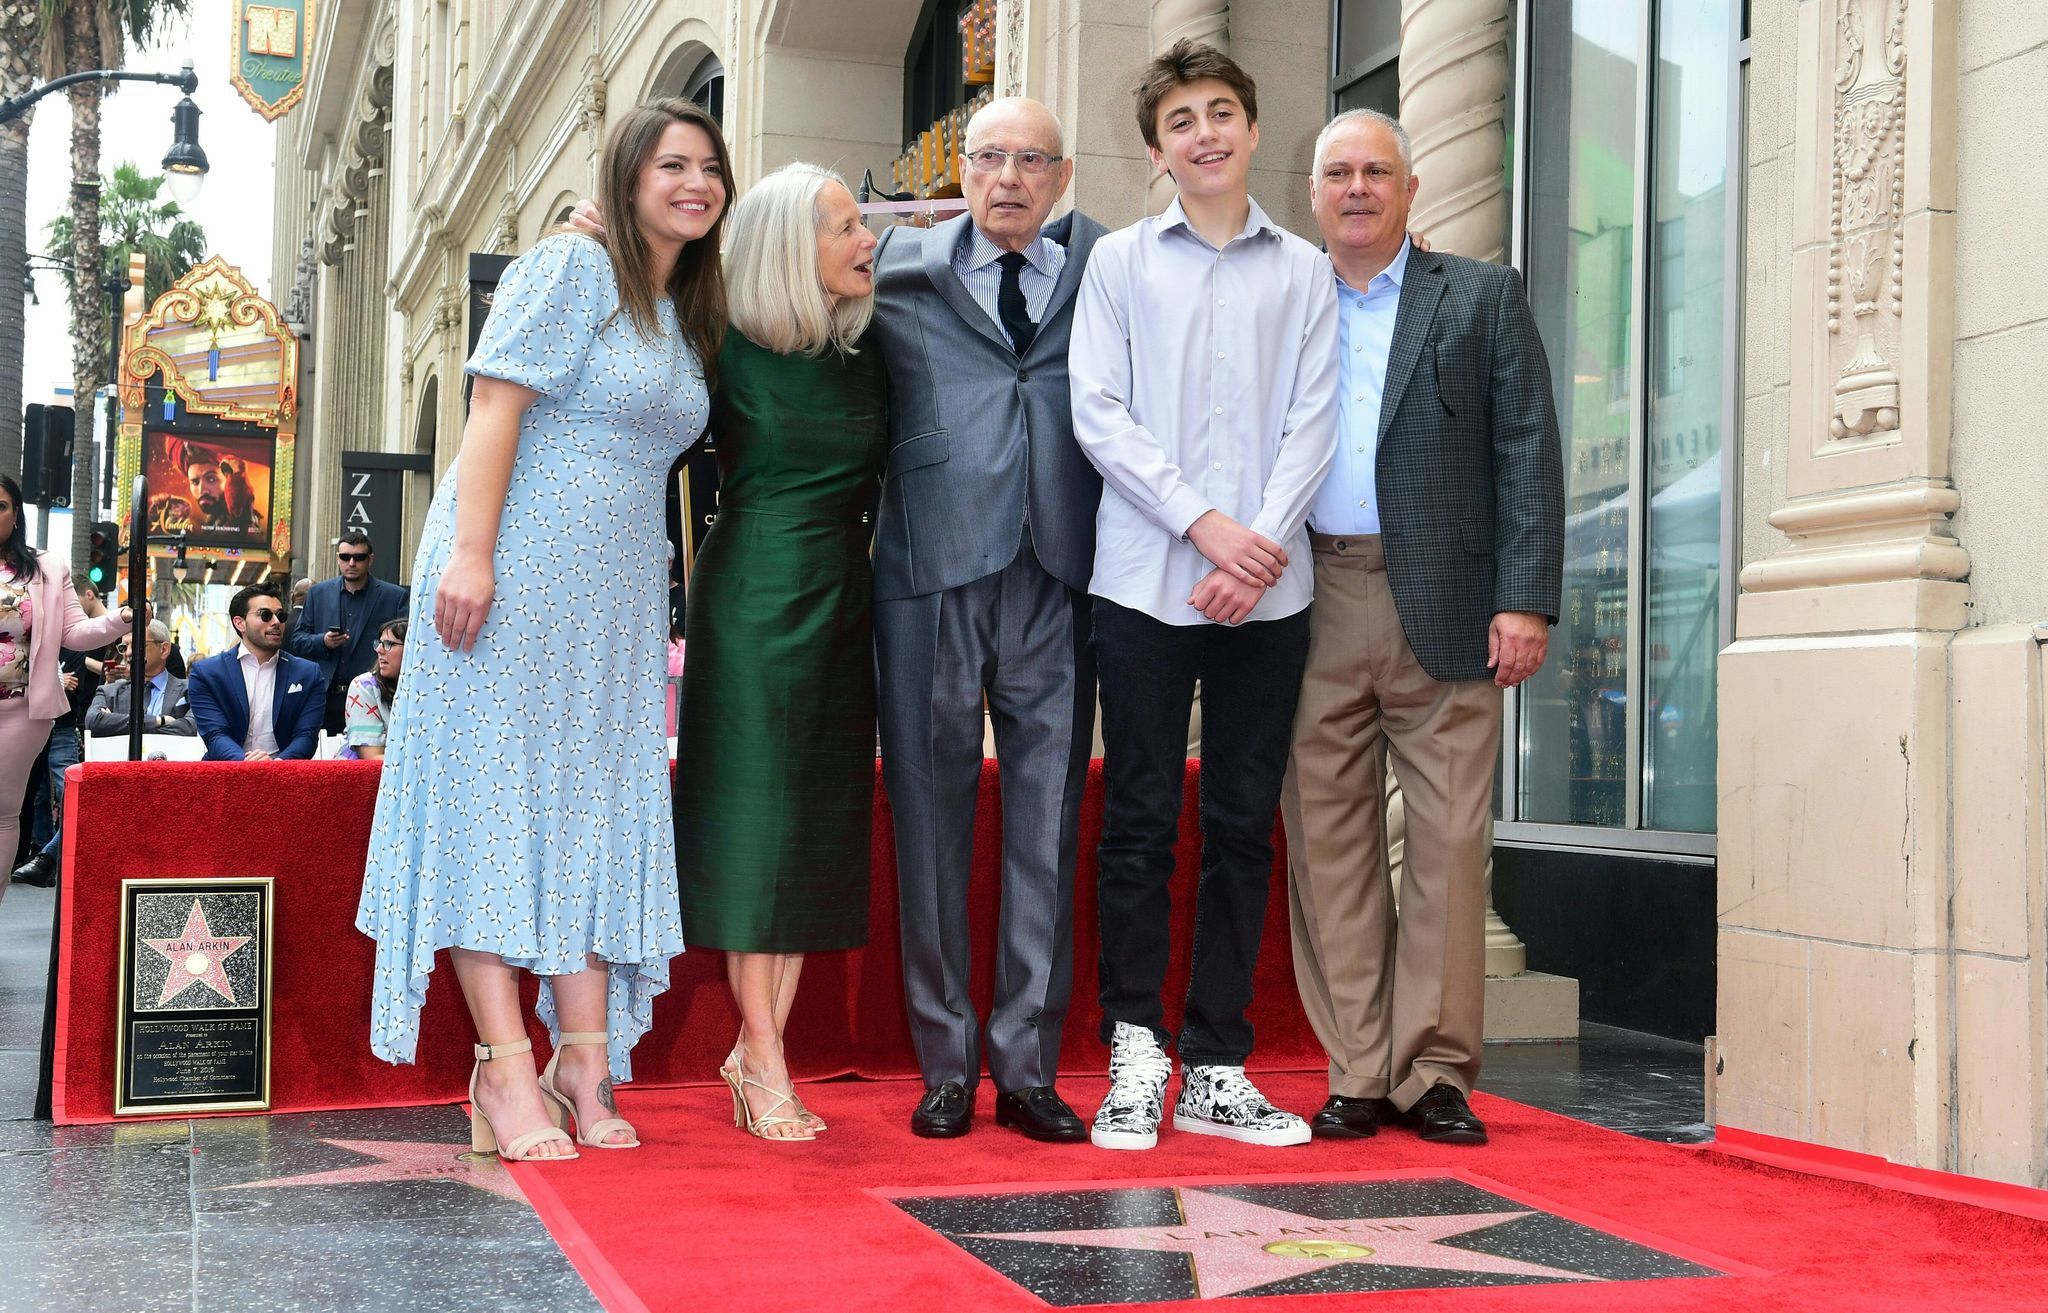 Actor Alan Arkin (C) poses with his wife Suzanne Newlander Arkin (2L) and his family at his newly unveiled Hollywood Walk of Fame Star ceremony in Hollywood on June 7, 2019. Arkin, who starred in films including 